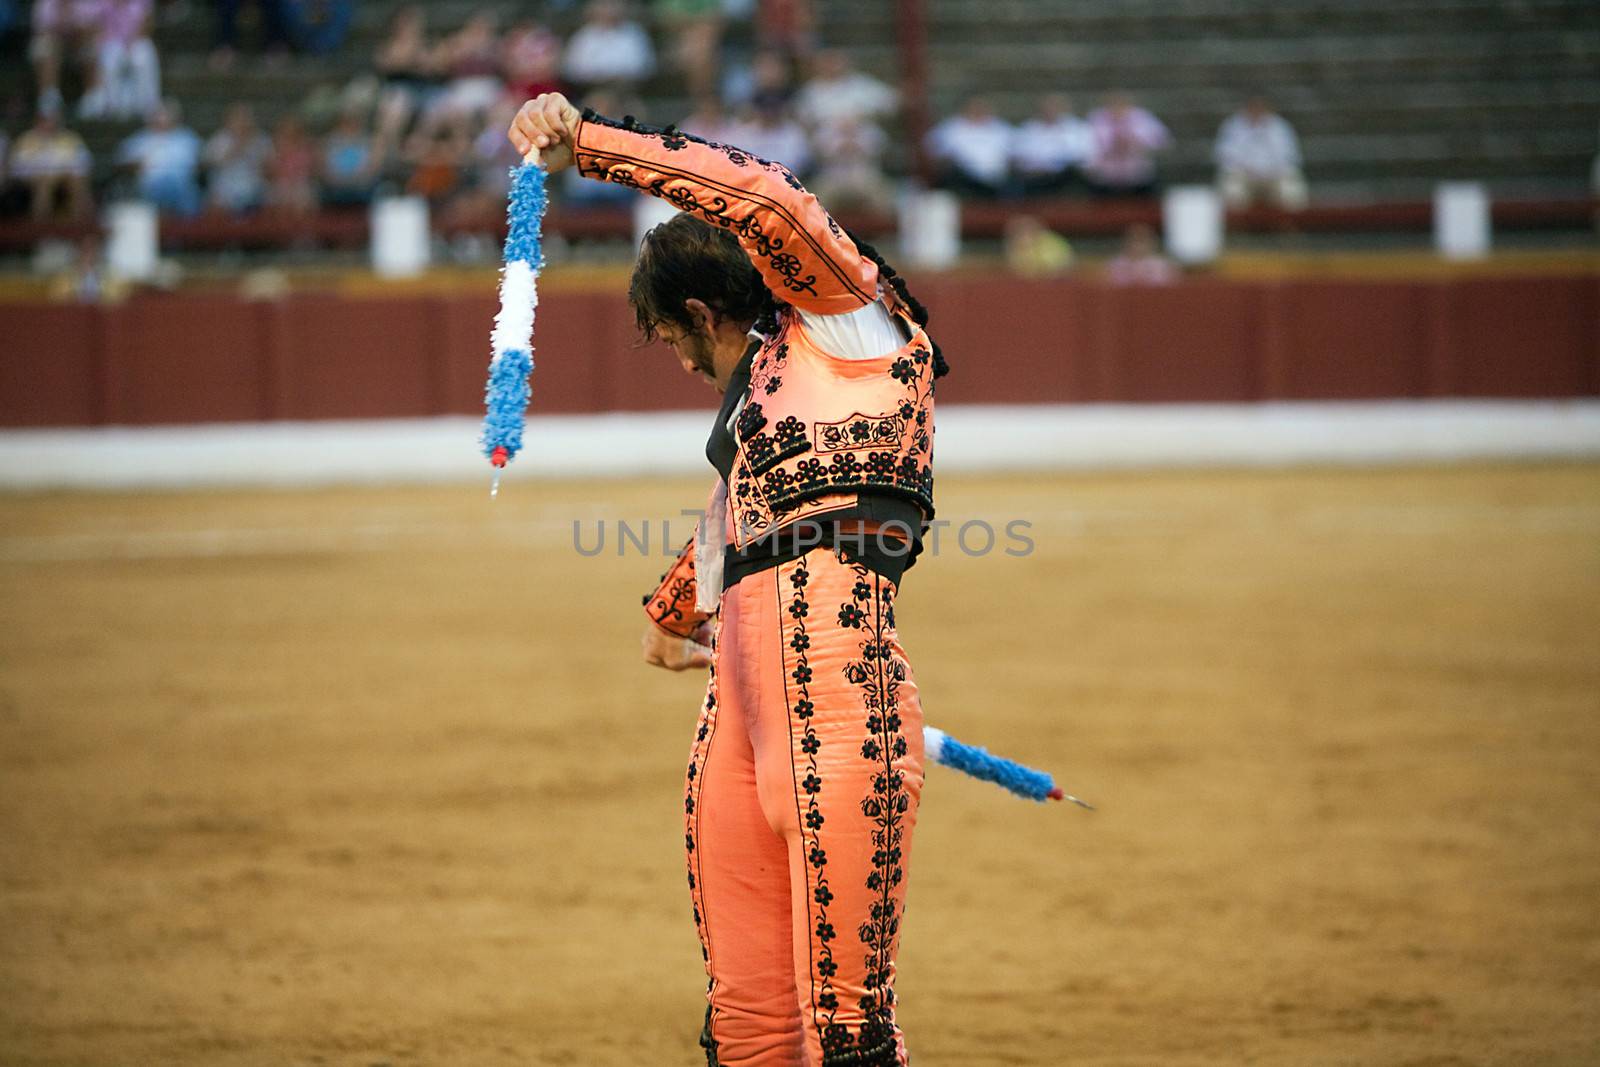 Banderillero in action, Spain by digicomphoto